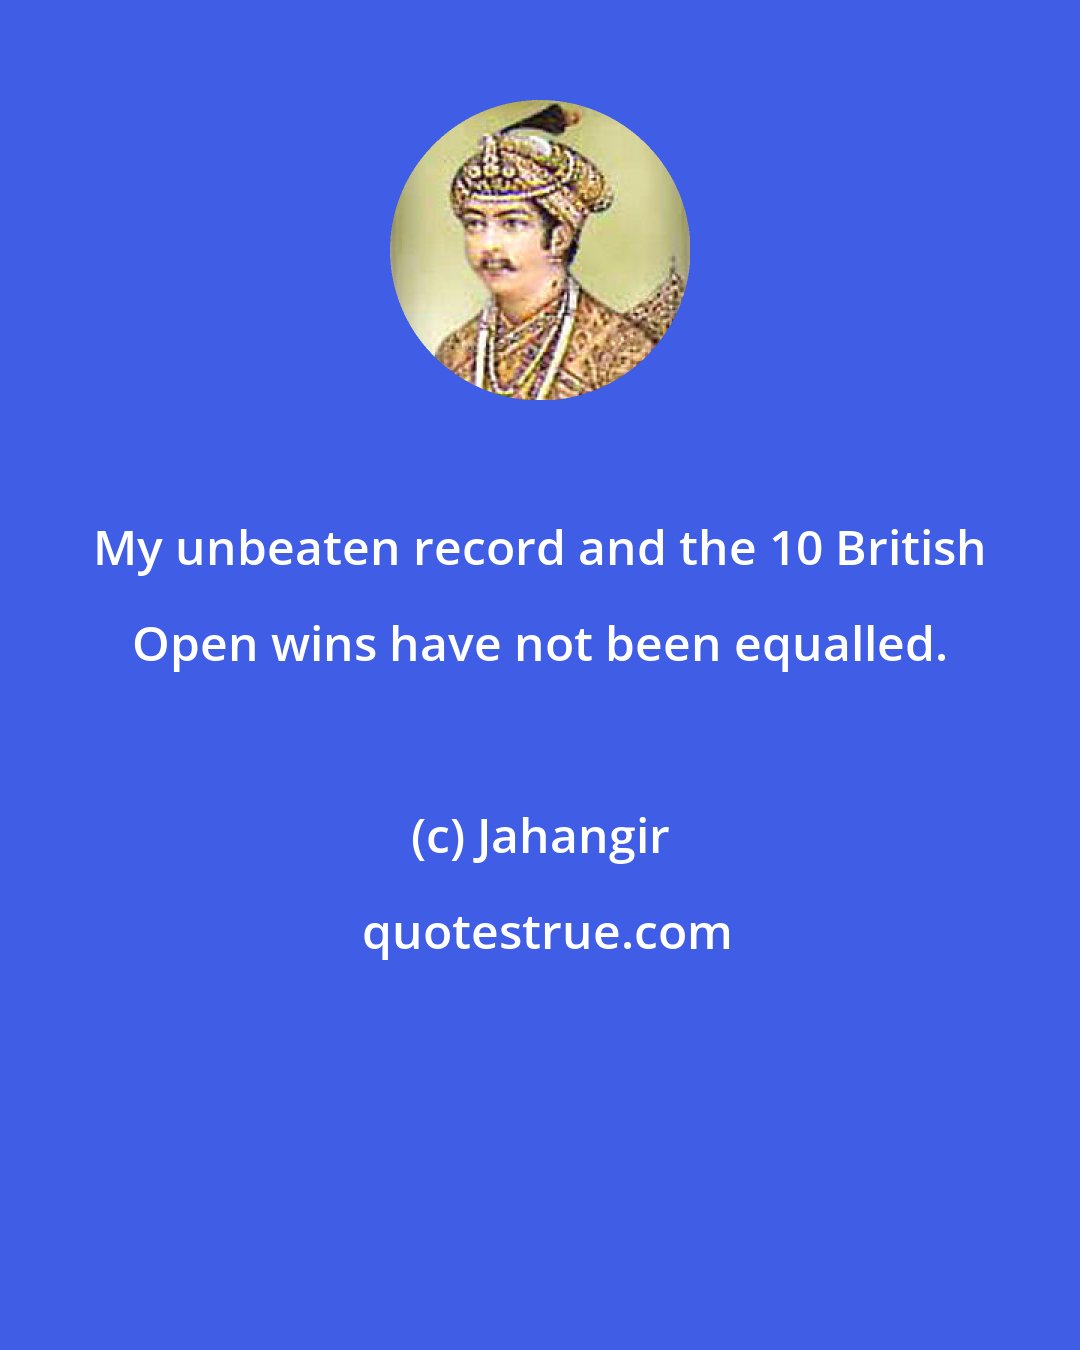 Jahangir: My unbeaten record and the 10 British Open wins have not been equalled.